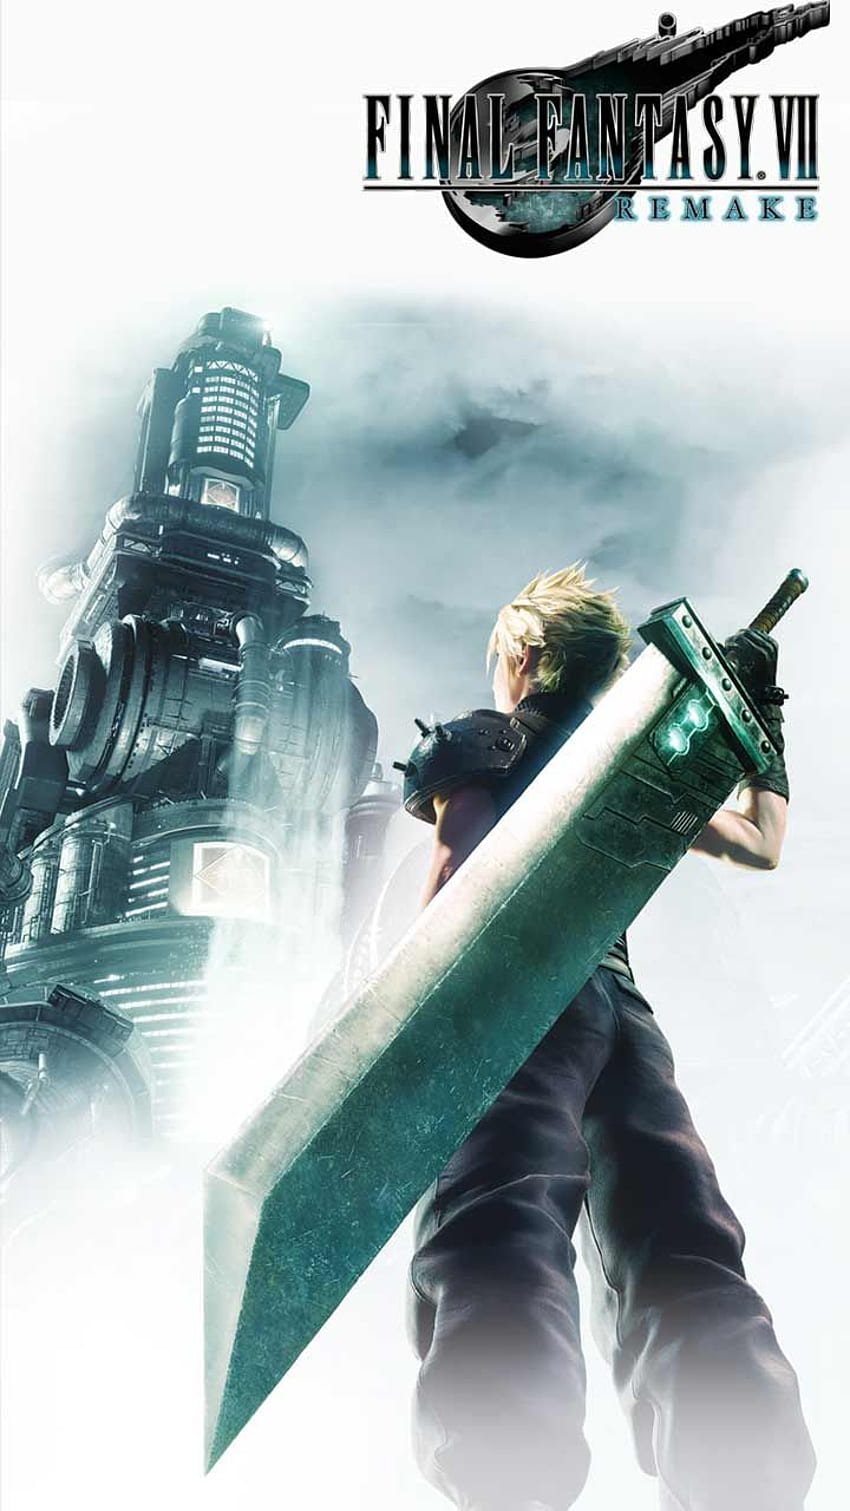 Final Fantasy 7 Remake phone background PS4 game art poster logo on iPhone android. Ff イラスト, クラウド ff, ファイナルファンタジー vii HD phone wallpaper